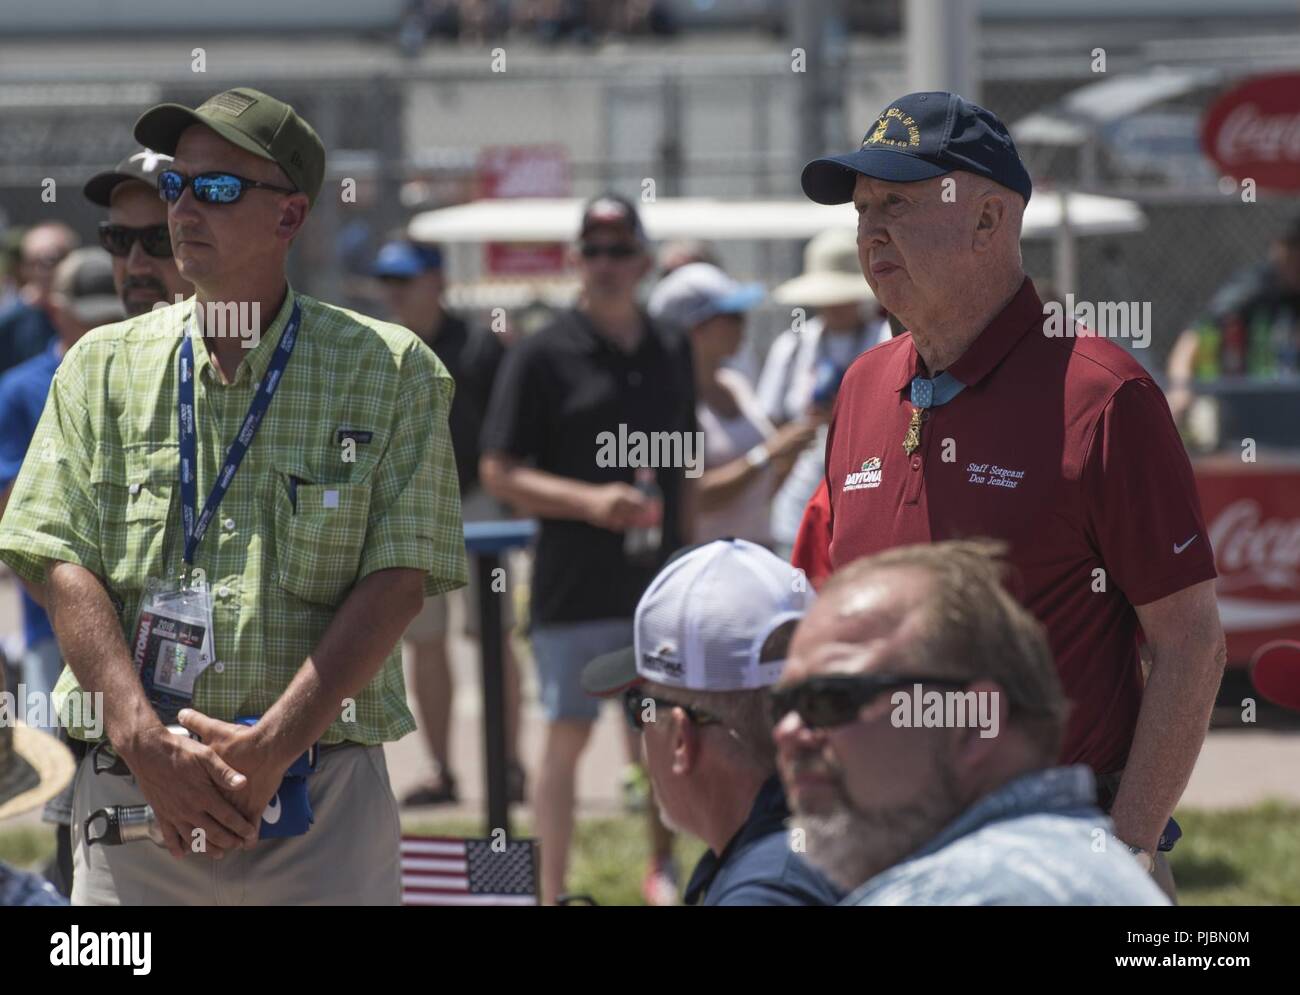 Retired Army Staff Sgt. Don Jenkins, a Medal of Honor recipient, watches as Max Impact performs at Daytona International Speedway in Daytona Beach, Fla., July 7, 2018. Max Impact performed for the Coca-Cola Firecracker 250 and the Coke Zero Sugar 400, showcasing Air Force excellence to tens of thousands of attendees. Stock Photo